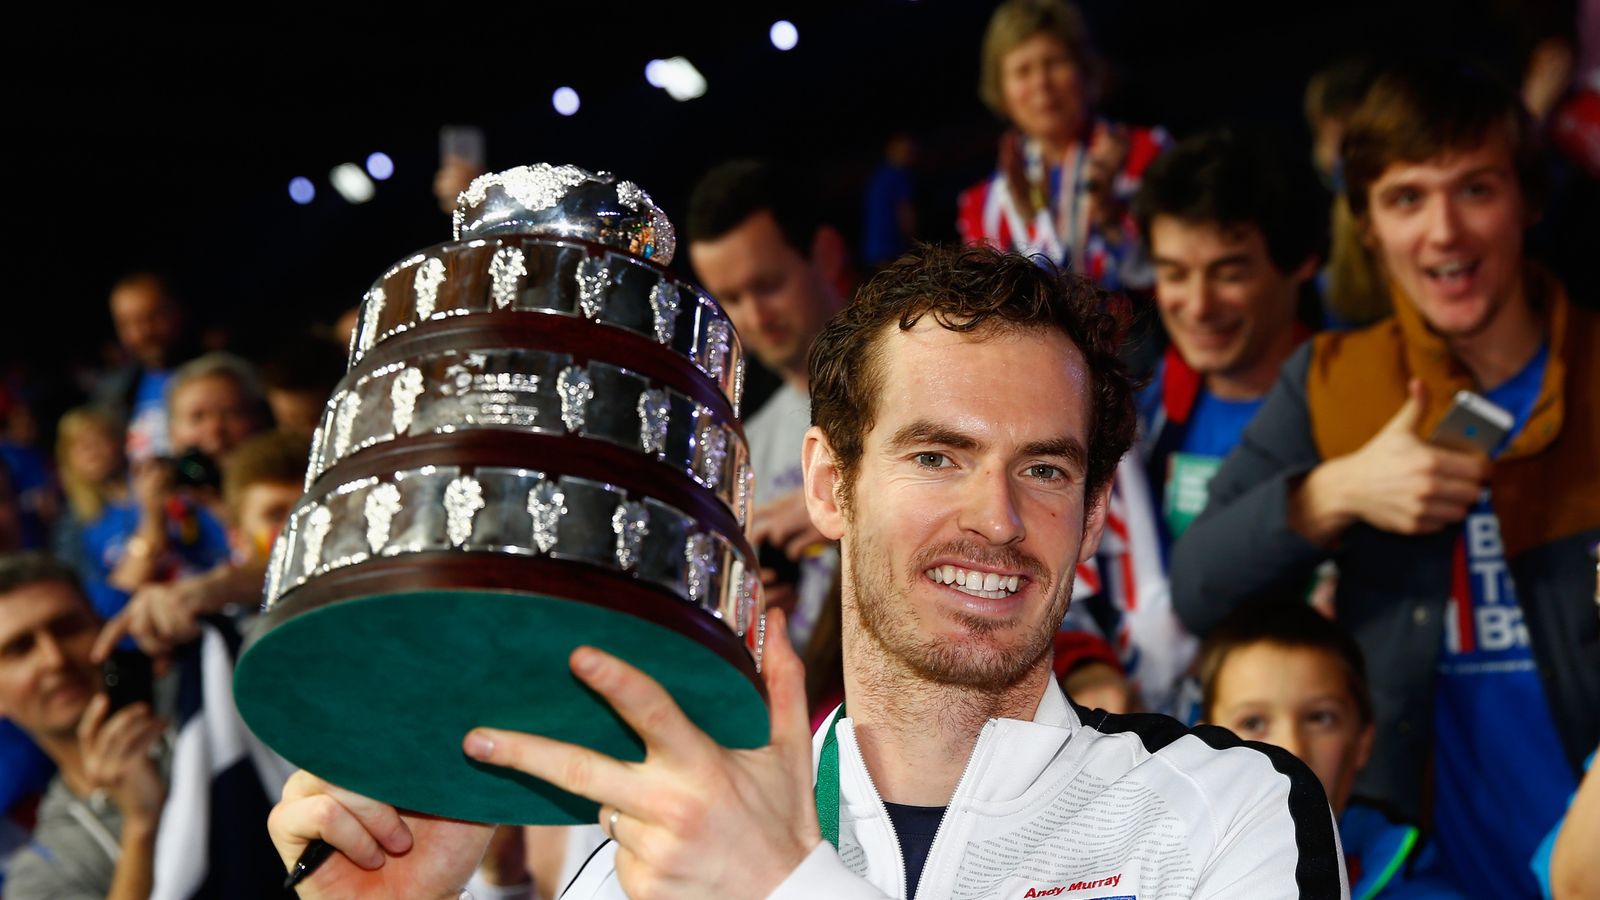 Key facts behind Andy Murray's remarkable Davis Cup run | Tennis News ...